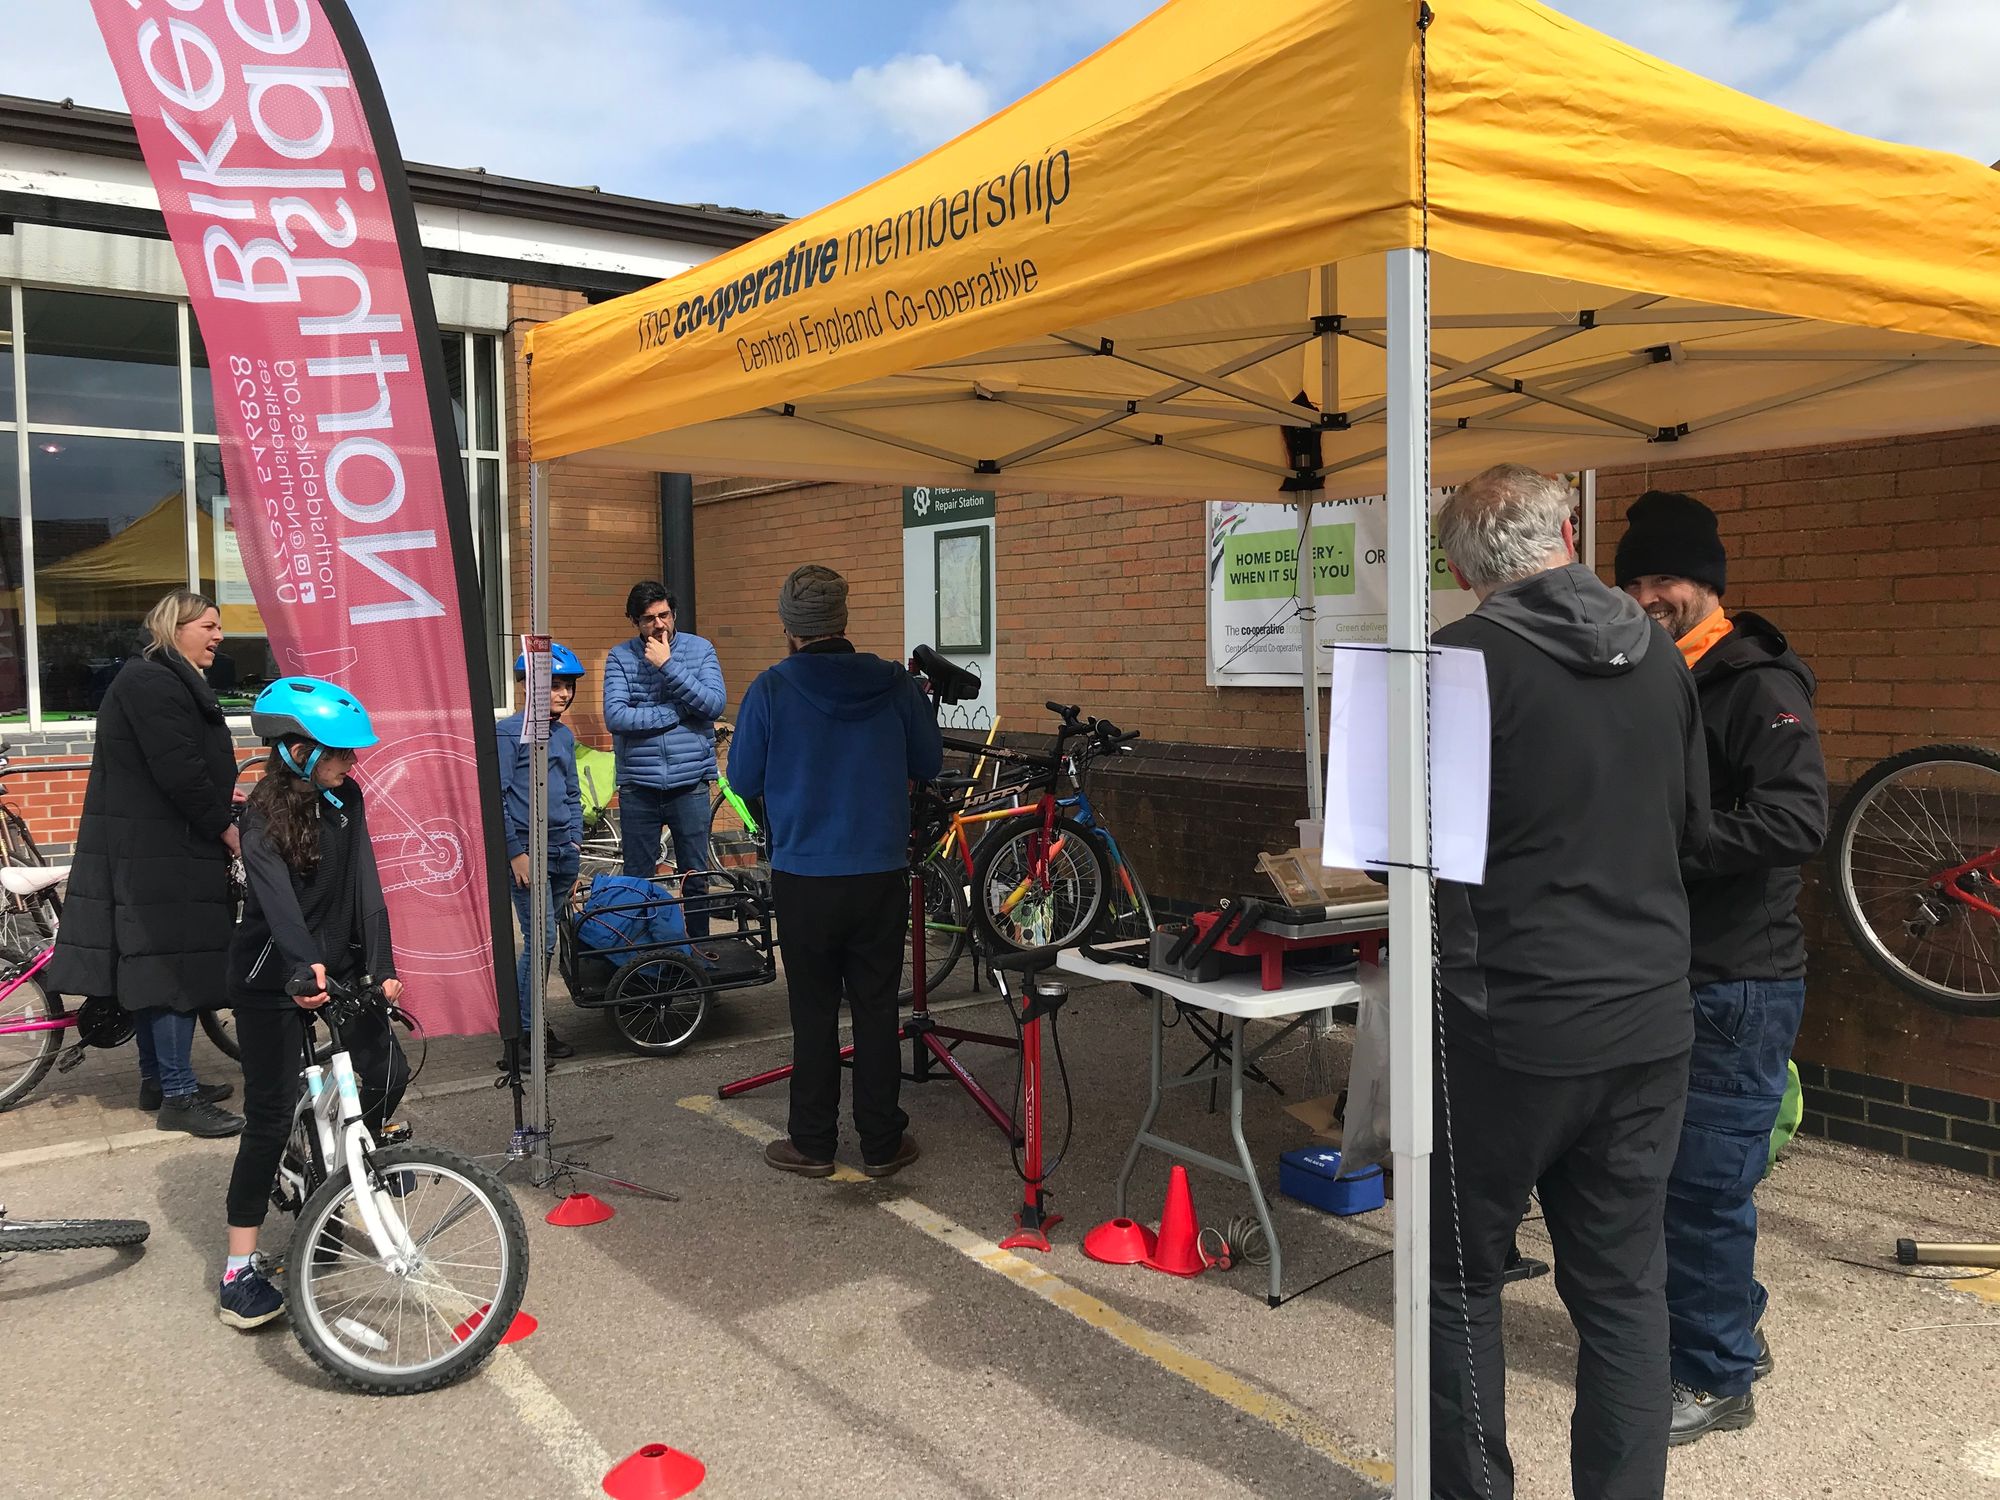 Recycle Your Bicycle/Dr Bike Event at Whetstone Store